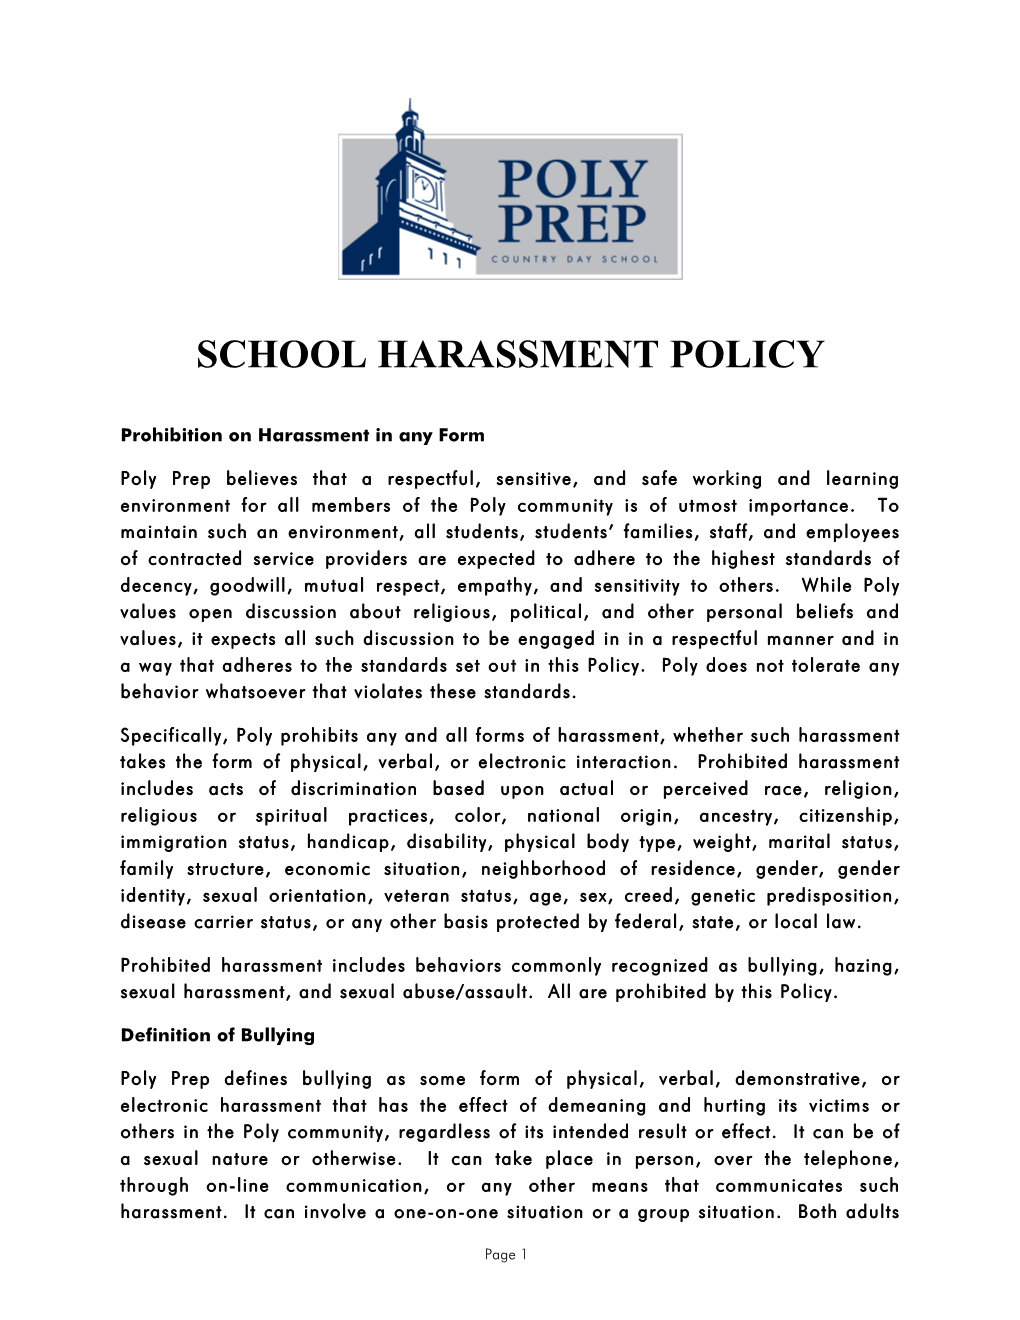 School Harassment Policy